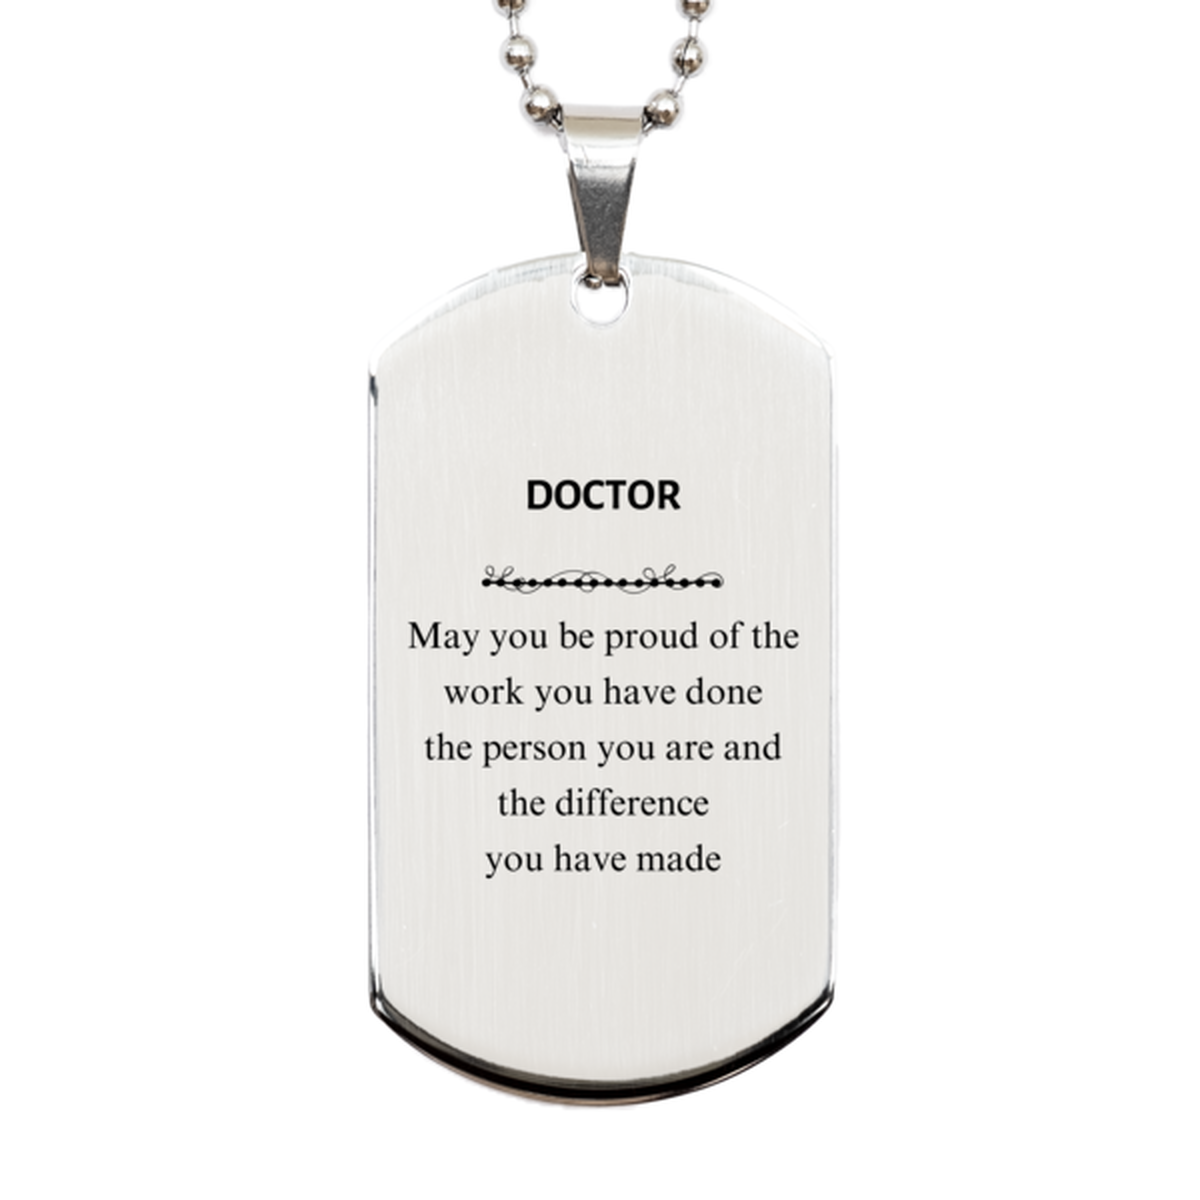 Doctor May you be proud of the work you have done, Retirement Doctor Silver Dog Tag for Colleague Appreciation Gifts Amazing for Doctor